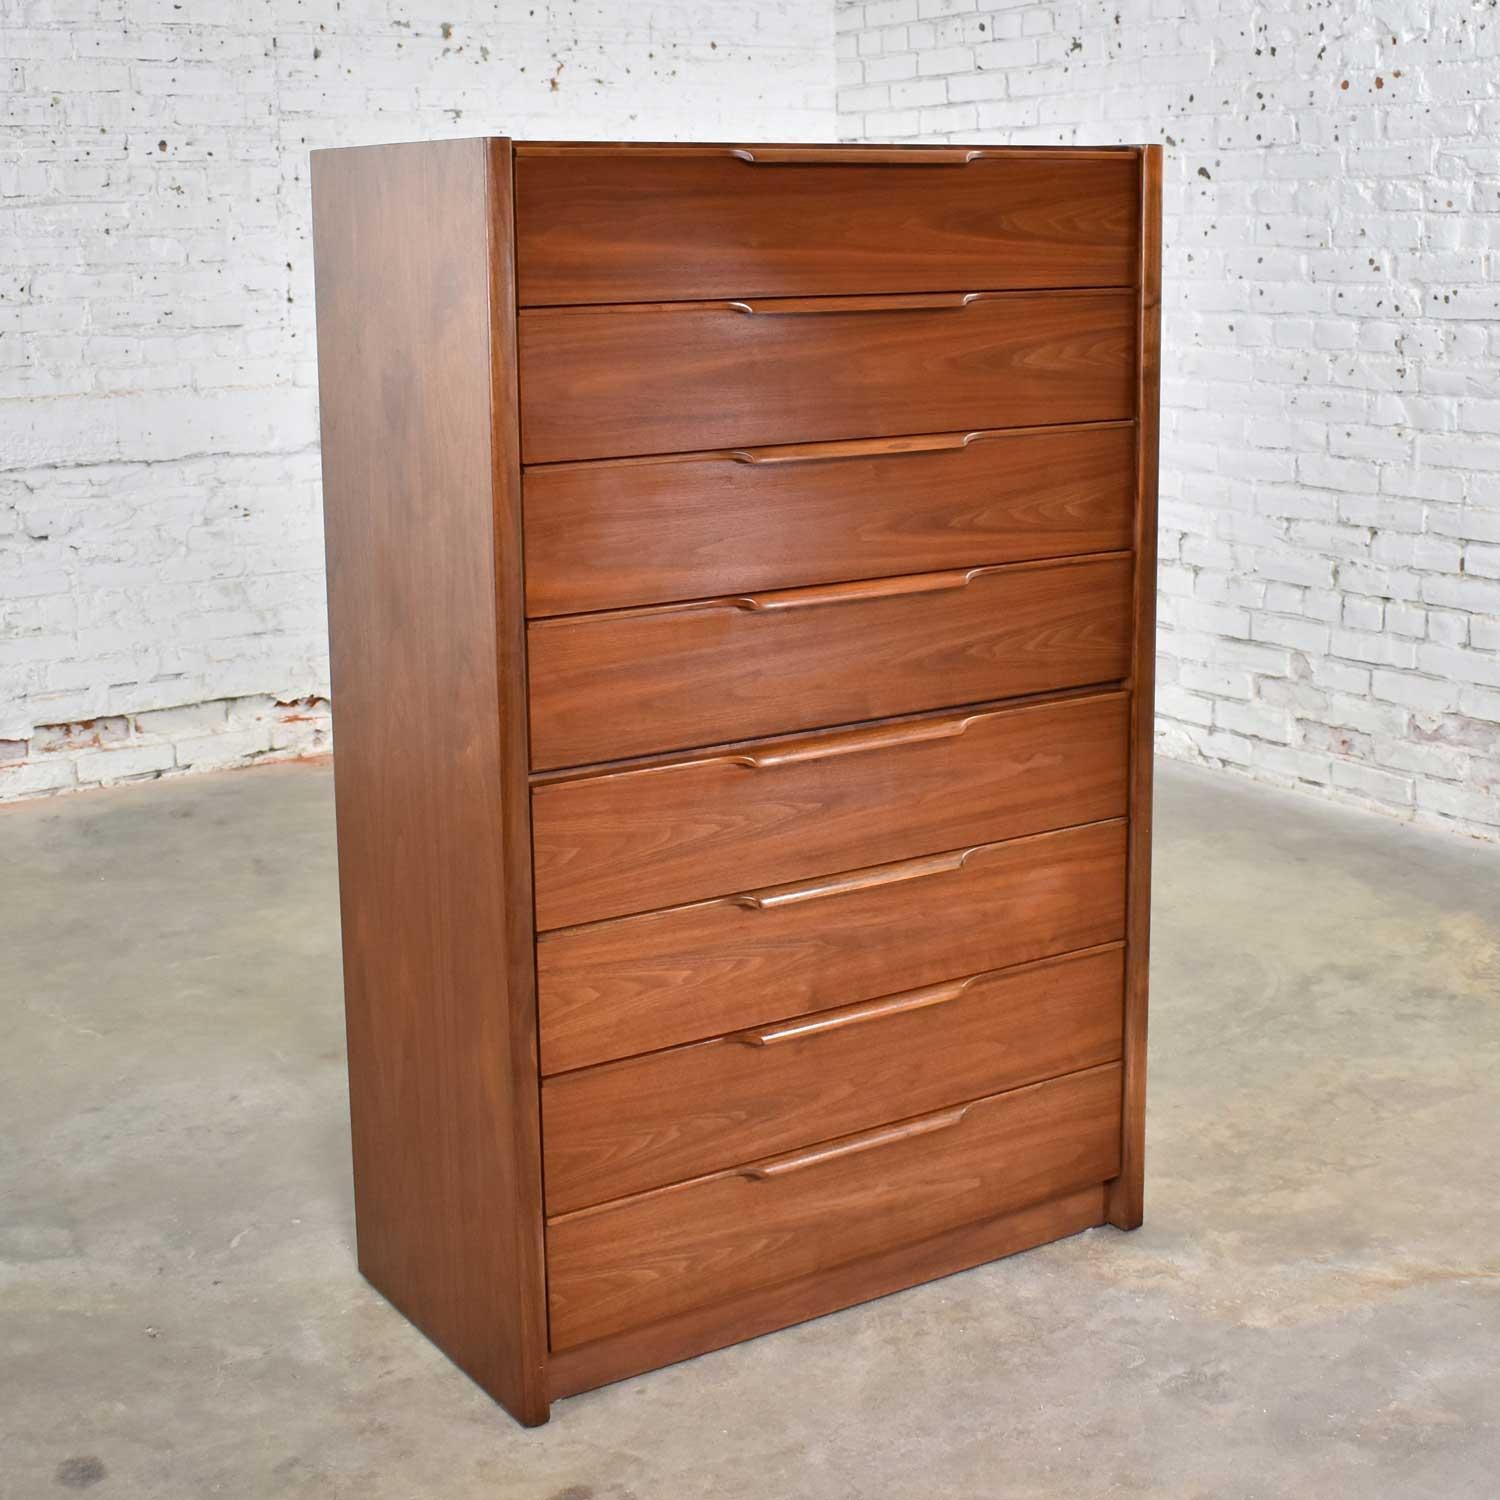 Handsome Scandinavian Modern style tall walnut chest of drawers by Barzilay Furniture Manufacturing Company. It is in fabulous vintage condition with no outstanding flaws we have found. Please see photos, circa 1980s.

This is but one magnificent